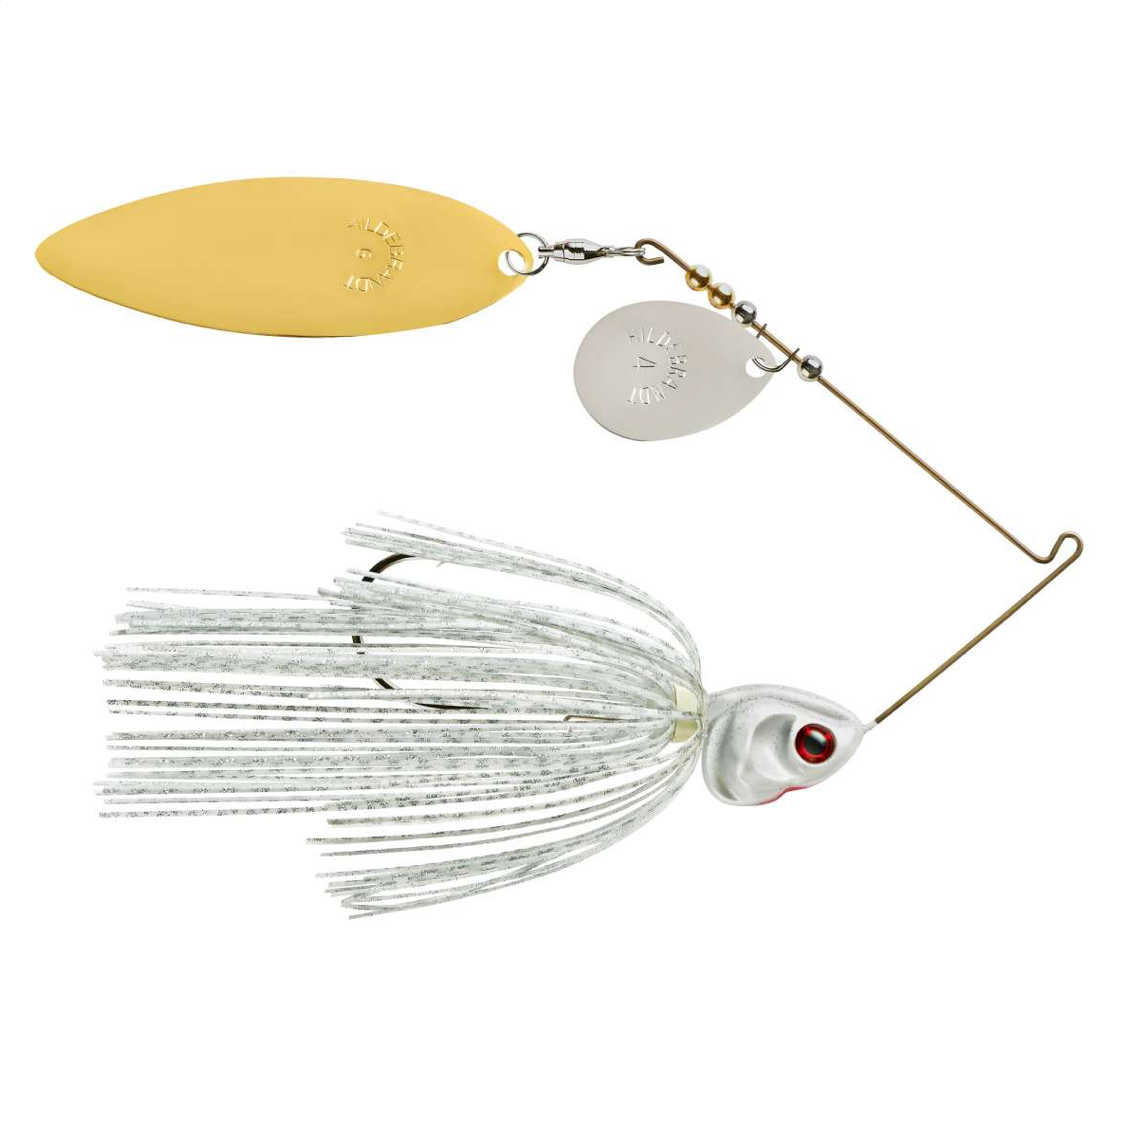 Booyah Covert Colorado Willow Blades Spinnerbait